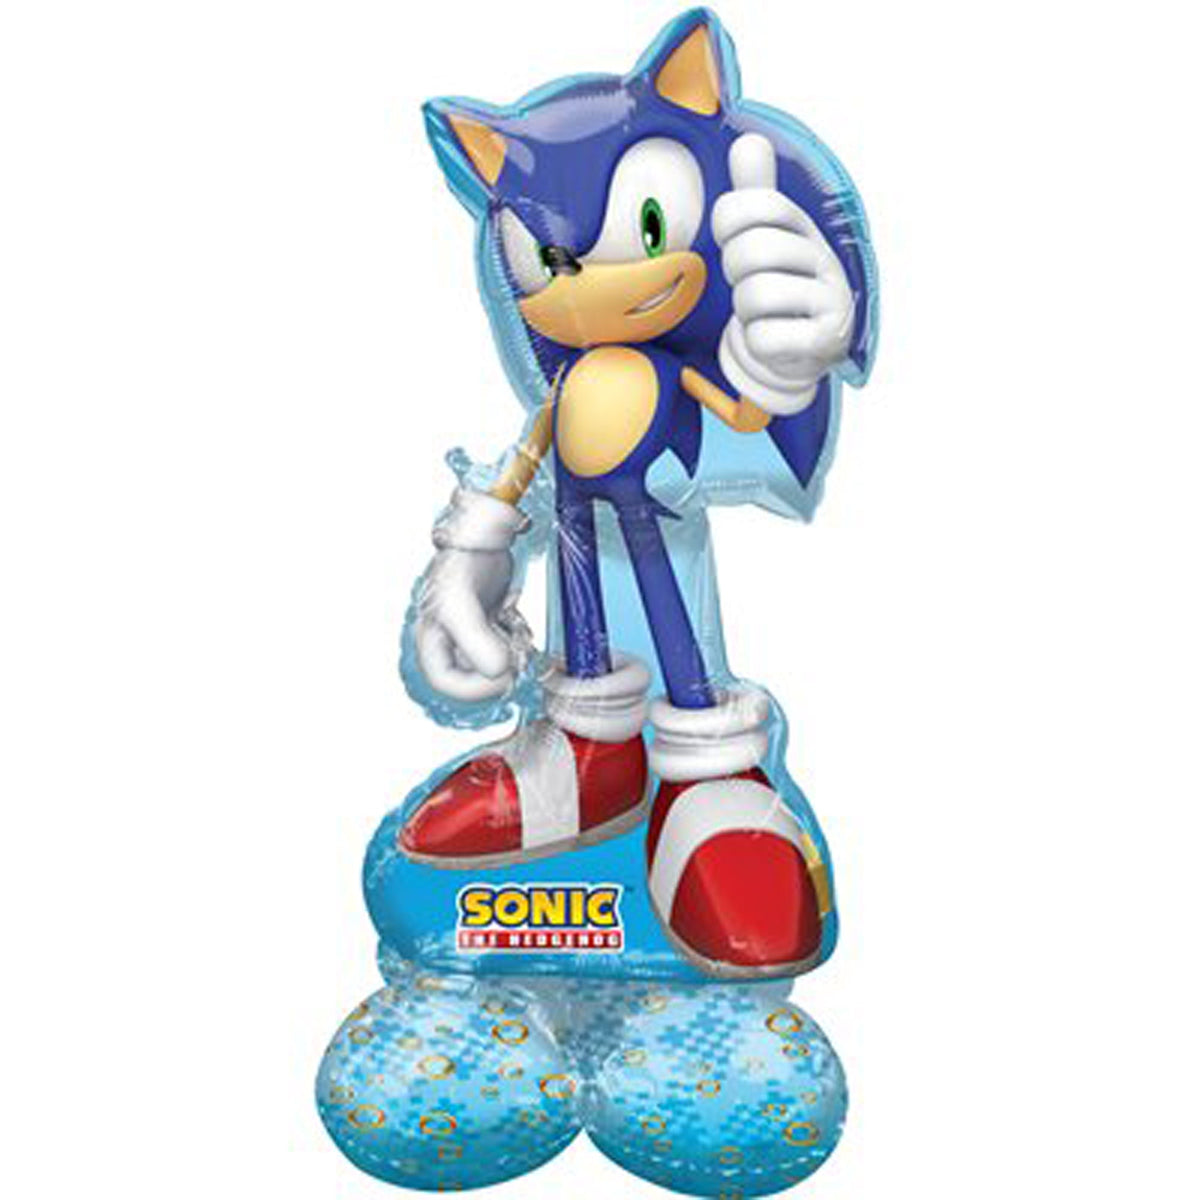 LE GROUPE BLC INTL INC Balloons Sonic Airloonz Standing Air-Filled Balloon, 53 Inches, 1 Count